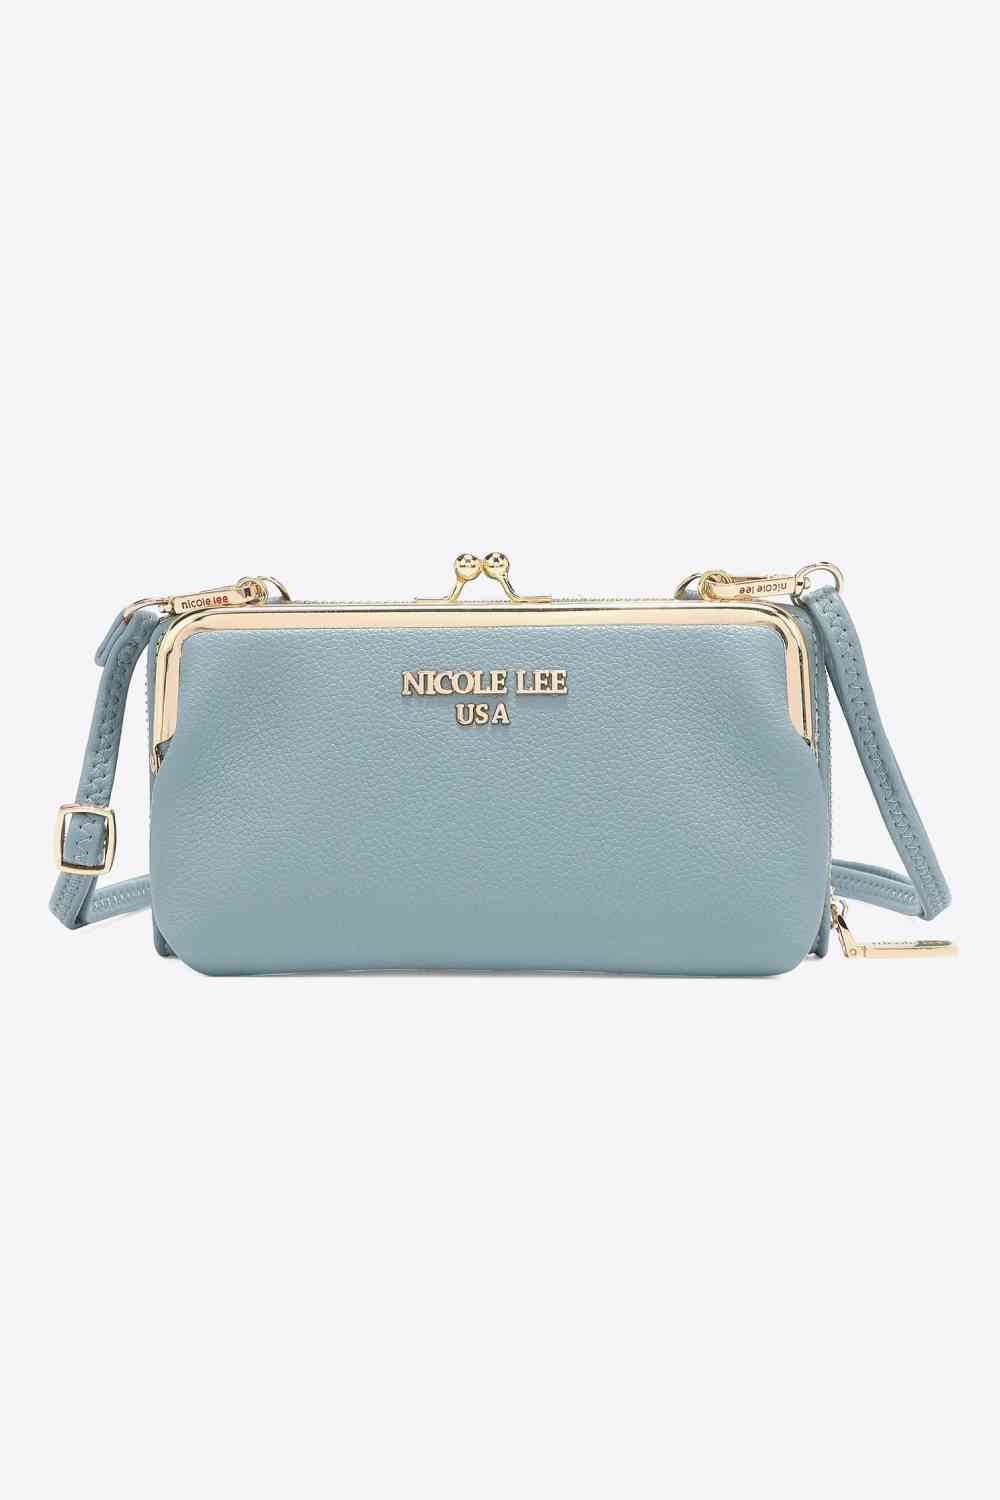 Nicole Lee USA Night Out Crossbody Wallet Purse Pastel Blue One Size